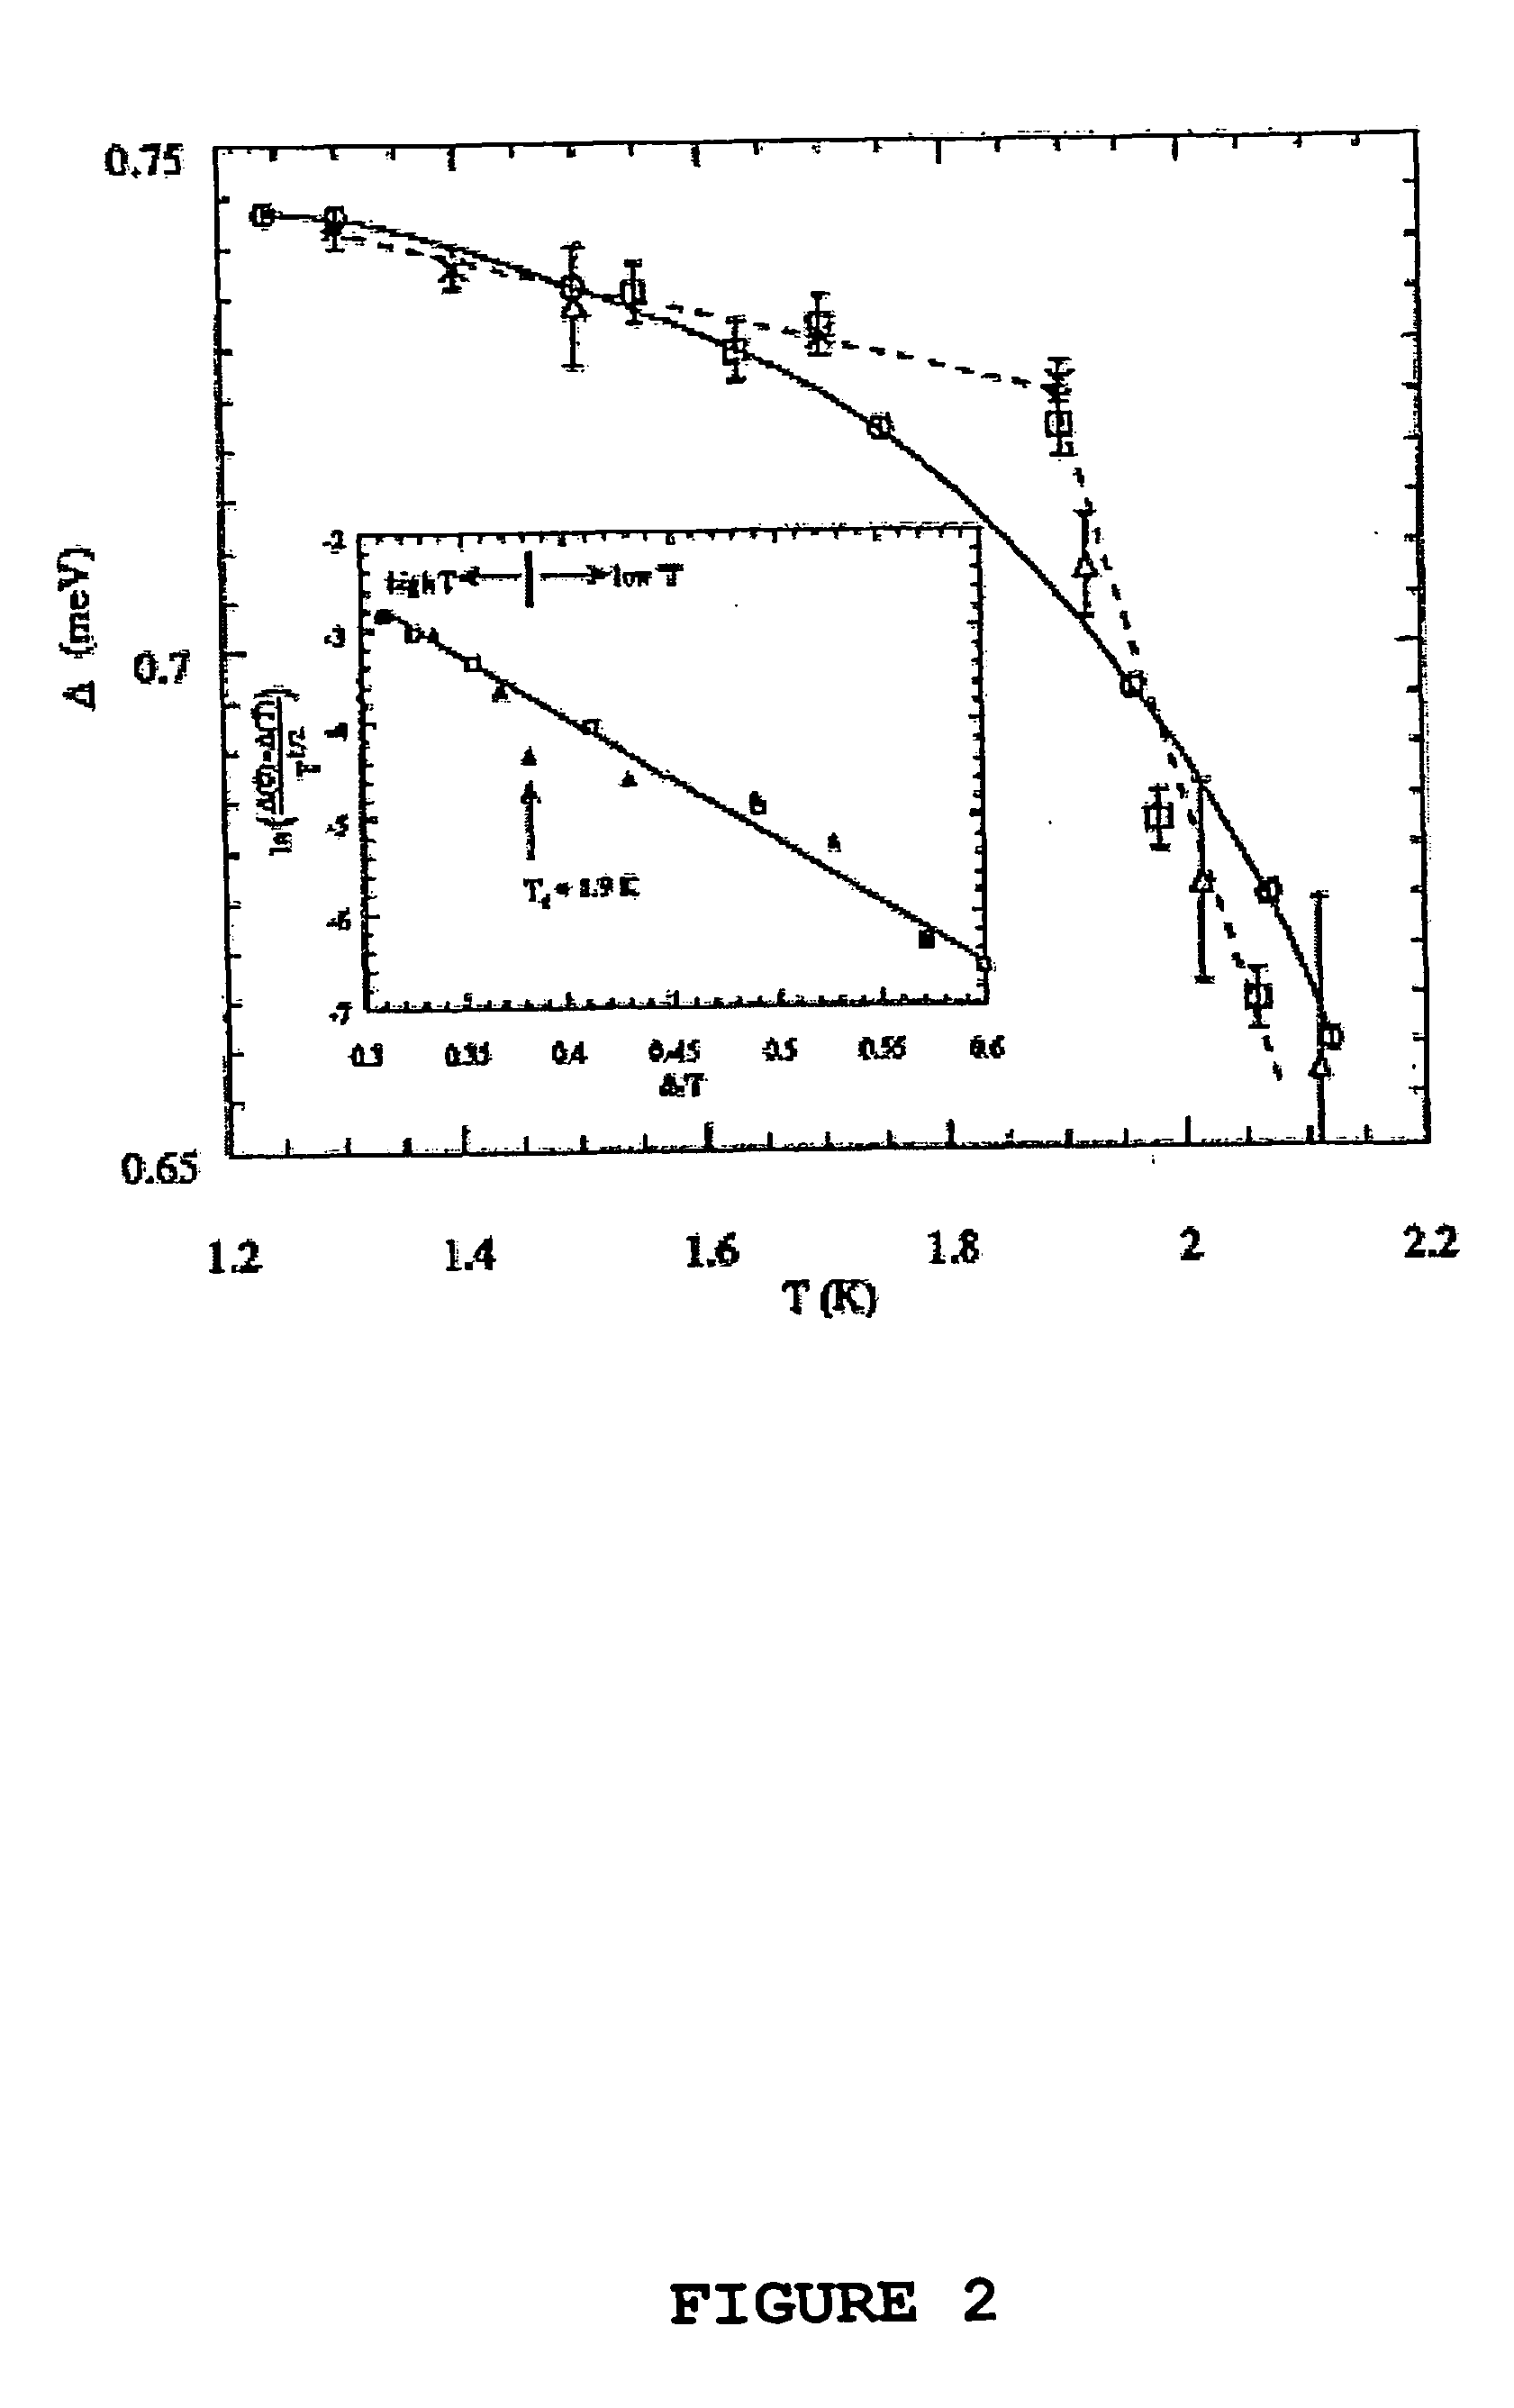 Process for the preparation and activation of susbstances and a means of producing same